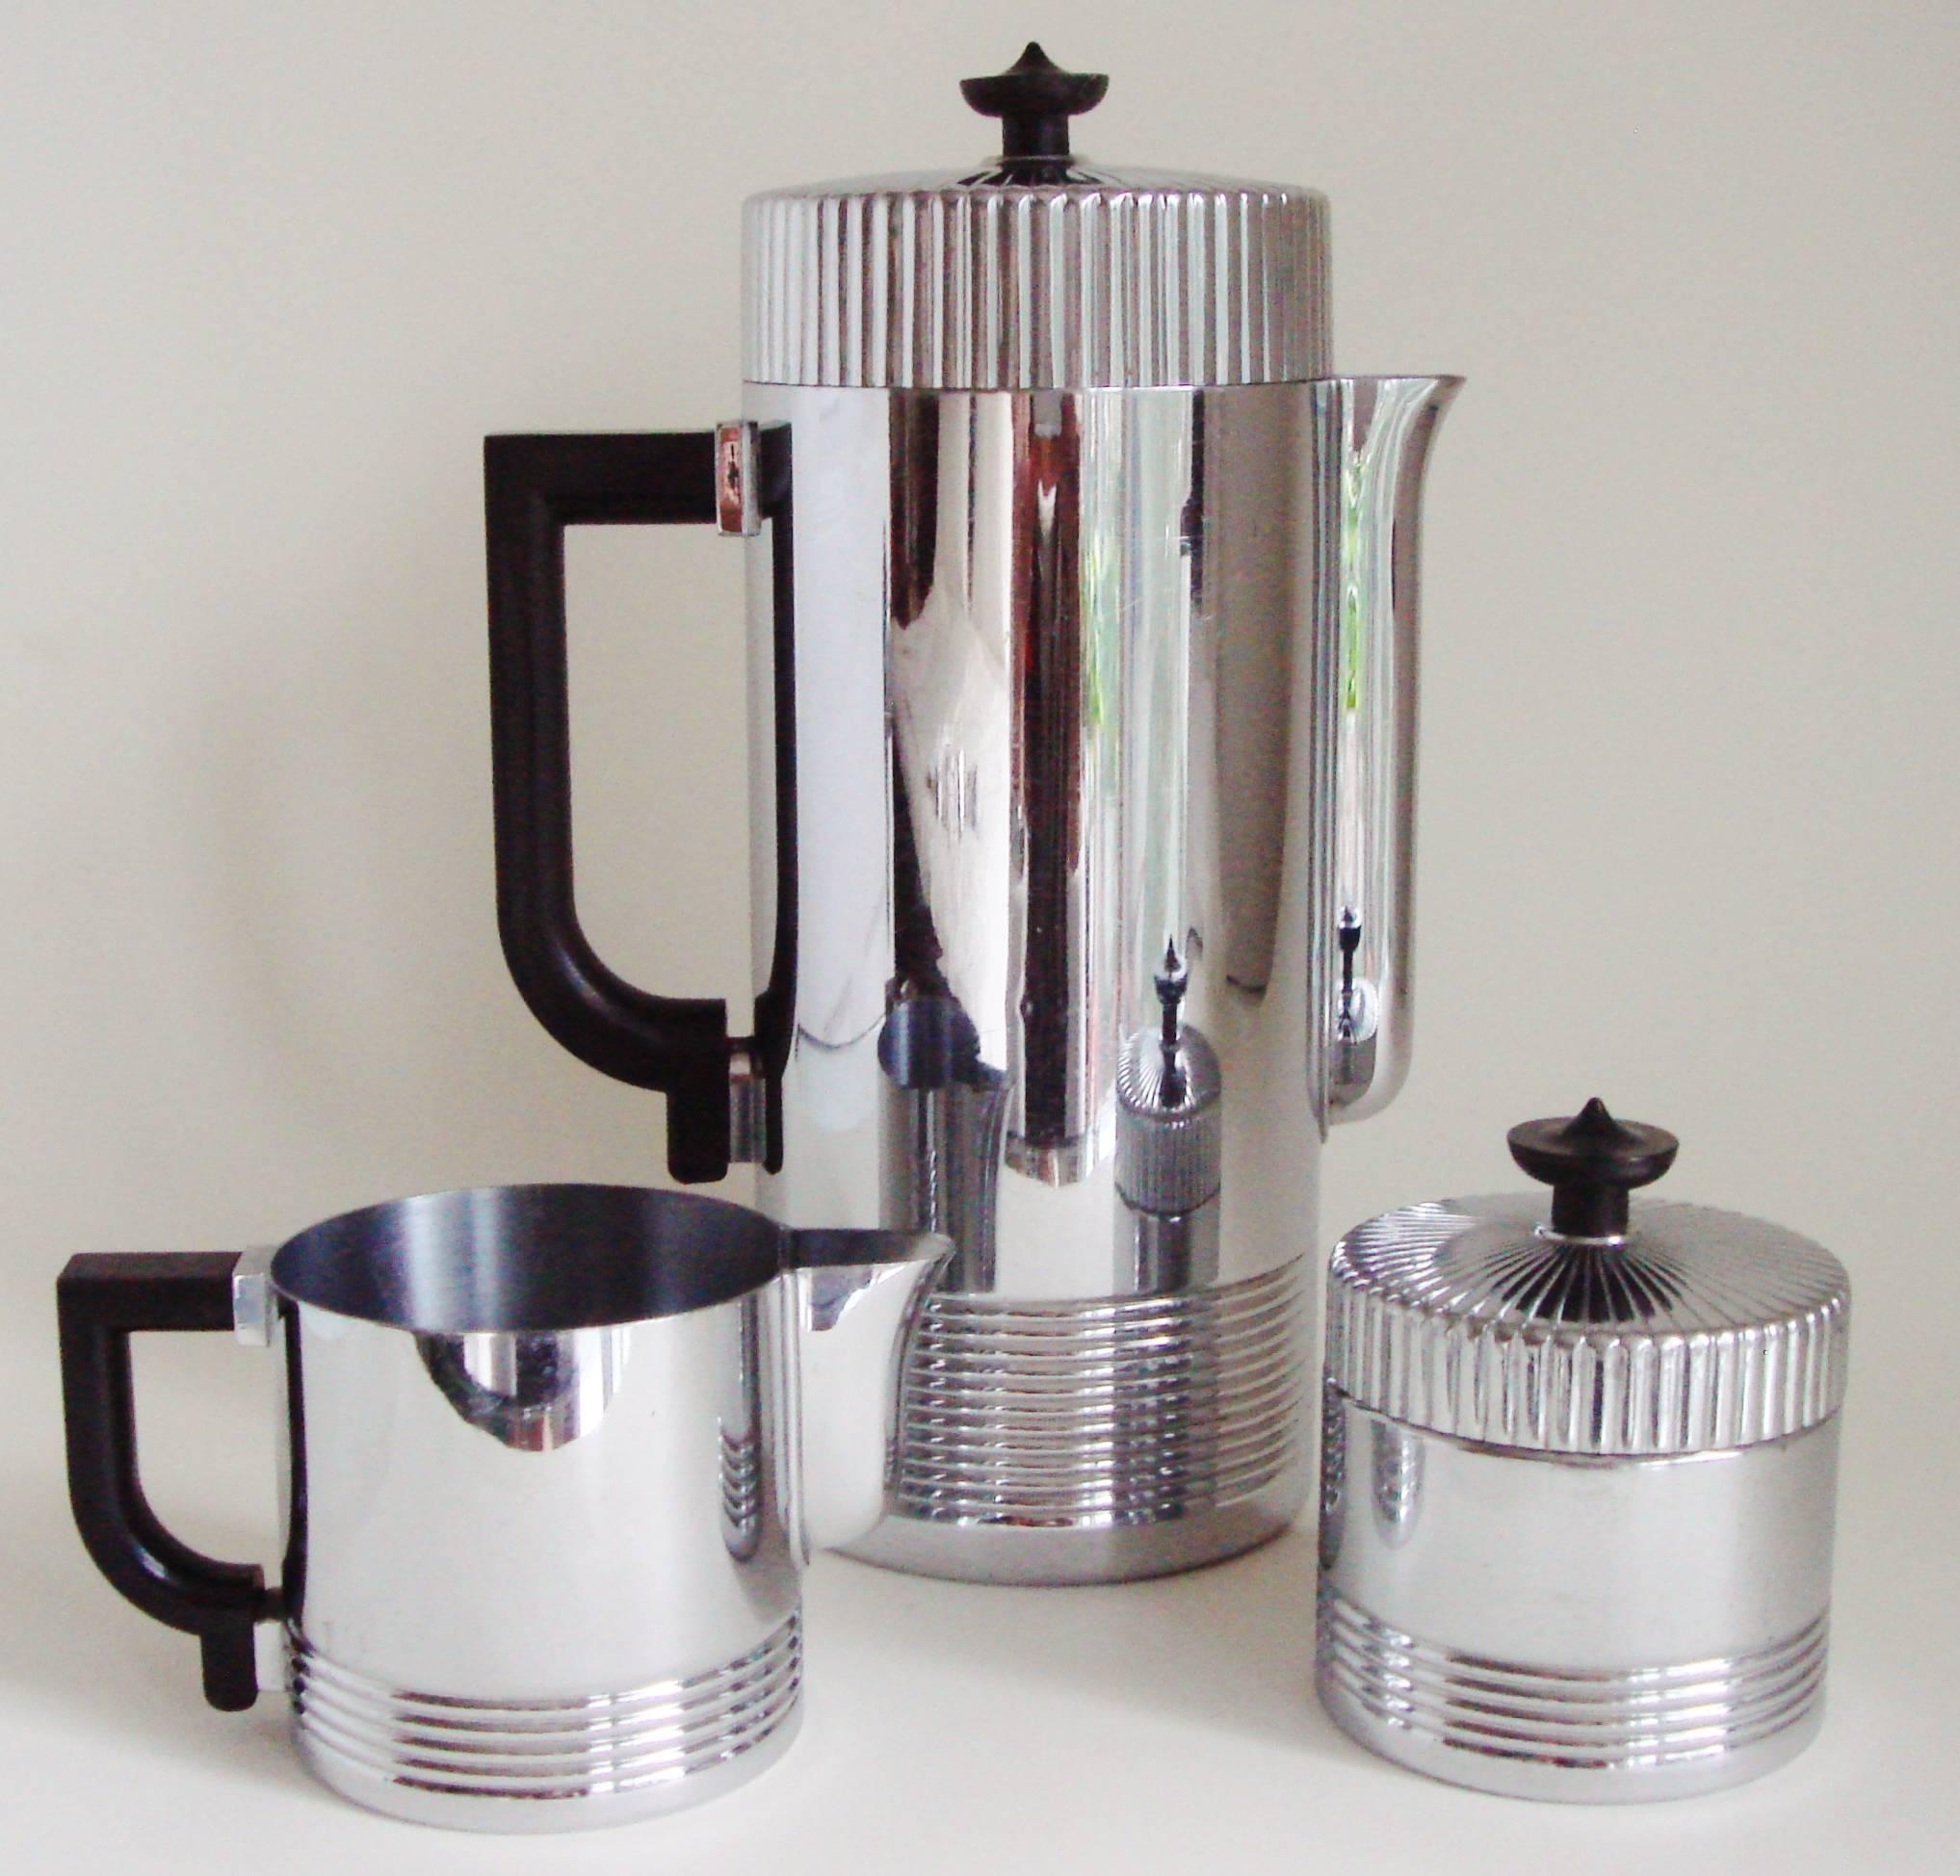 Walter Von Nessen's iconic design for the Chase Brass and Copper Company for their Continental Coffee Service is here presented in both of its versions. This set combines the more famous chrome with black Bakelite handles and knops (1935 Catalogue)